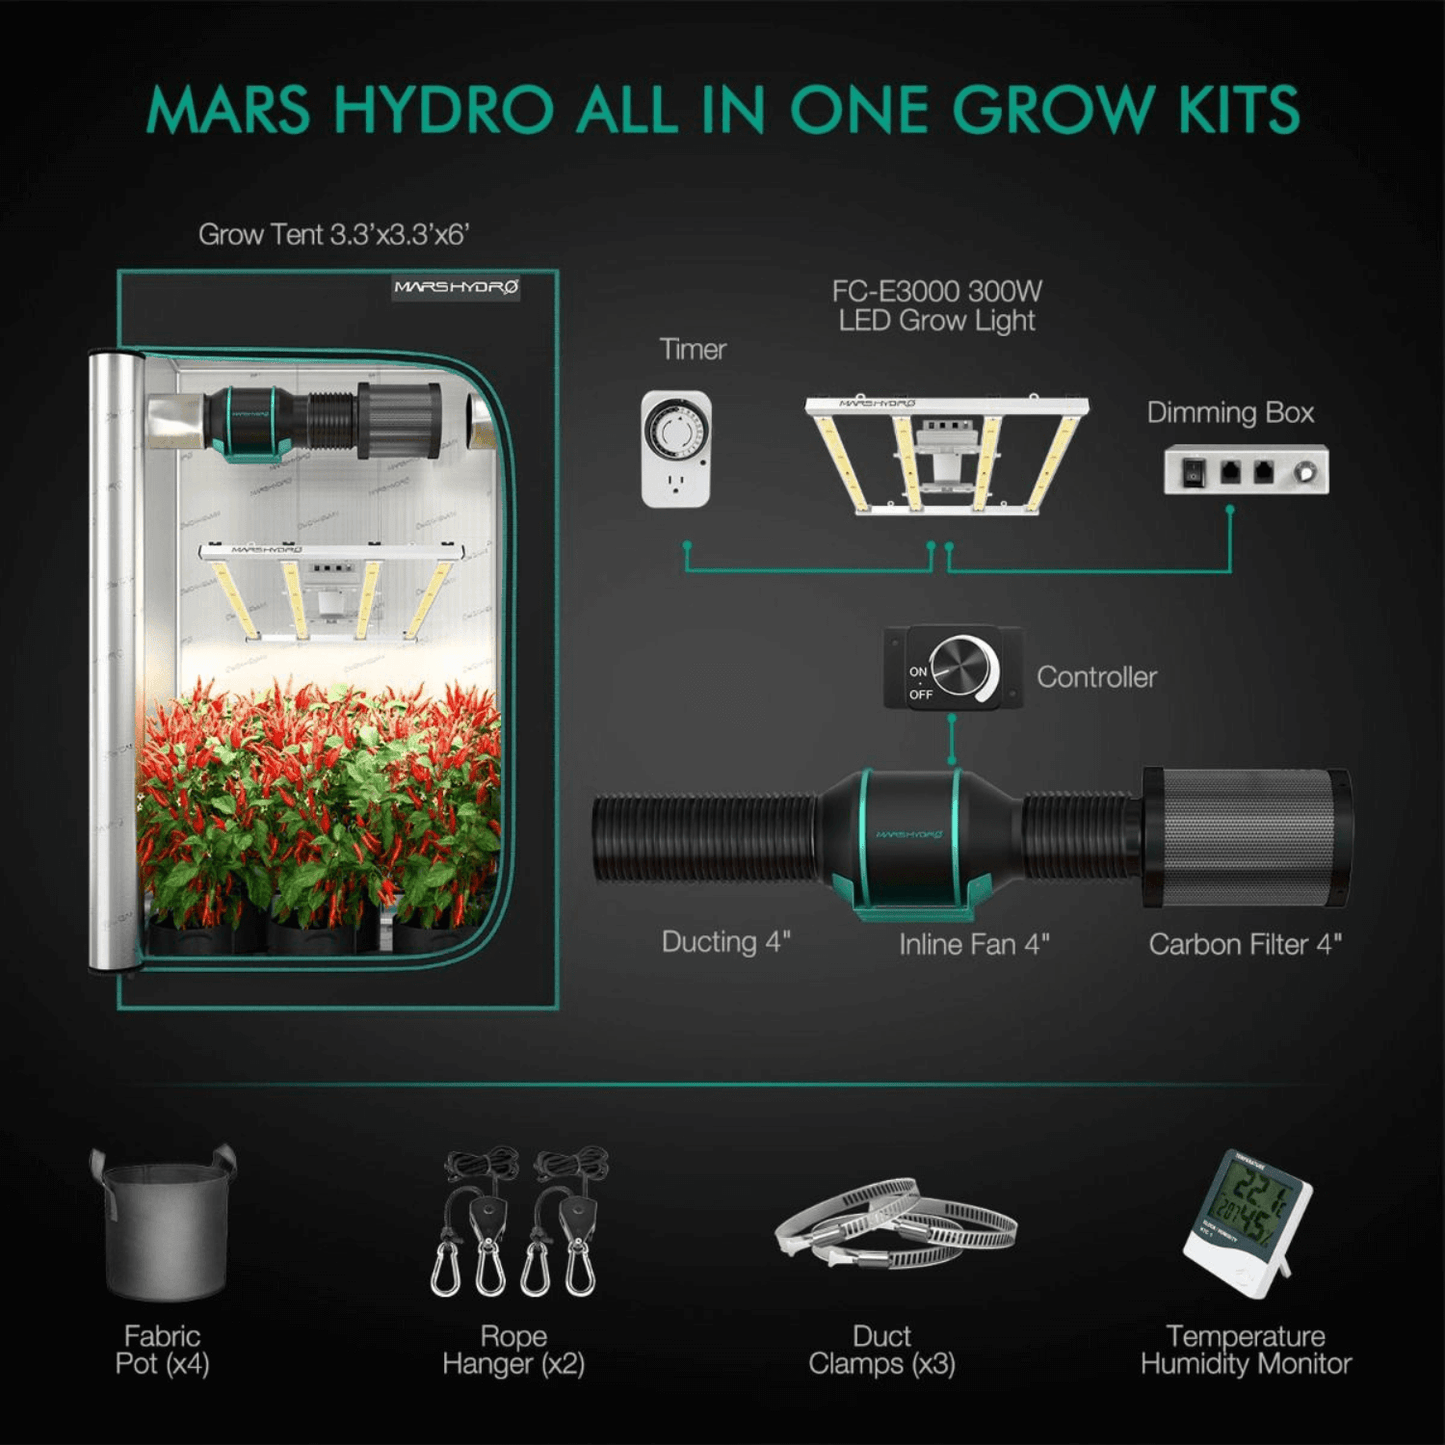 Mars Hydro FC-E3000 LED Grow Light + 3' x 3' Grow Tent + Inline Fan Combo with Speed Controller MH-FC-E3000-SET Kits